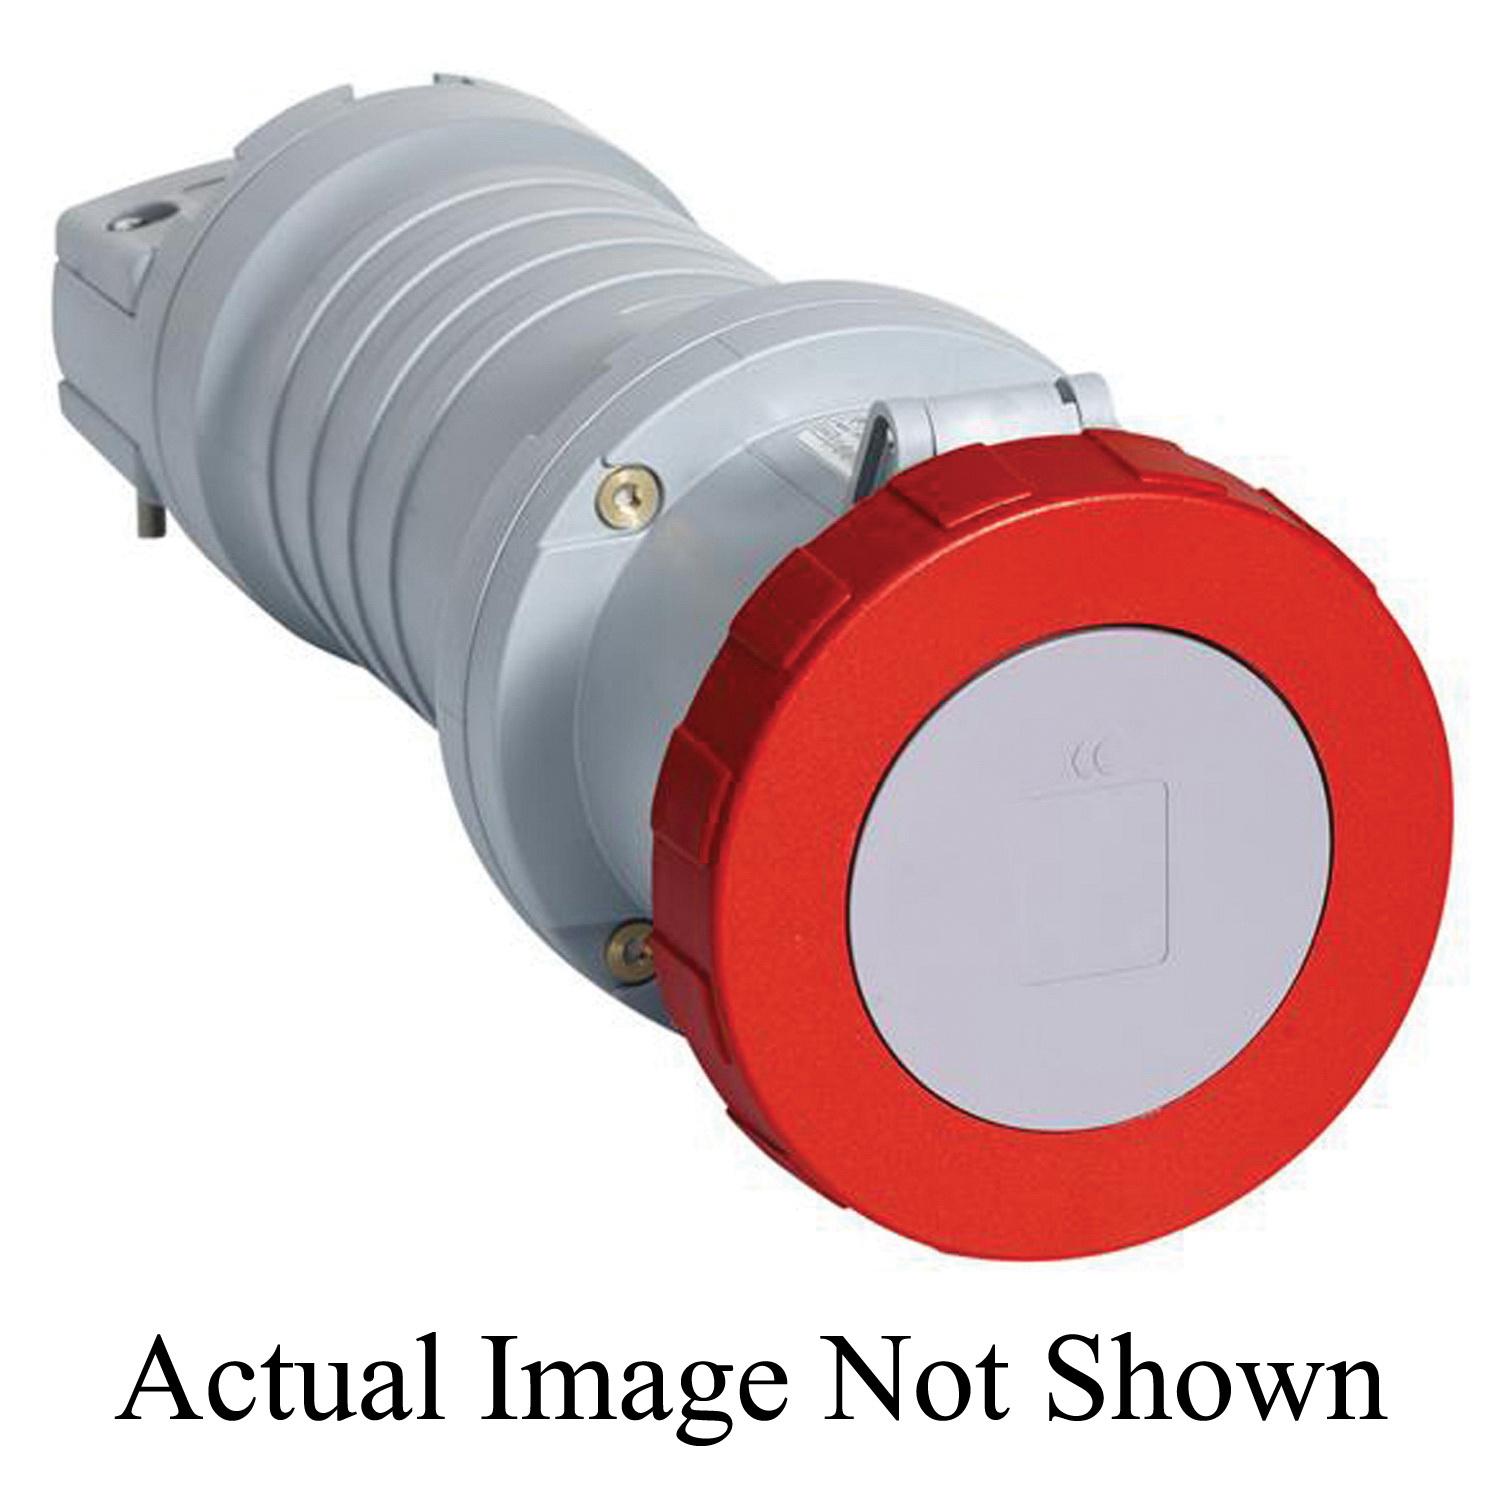 ABB ABB4100C9W Pin and Sleeve Connector